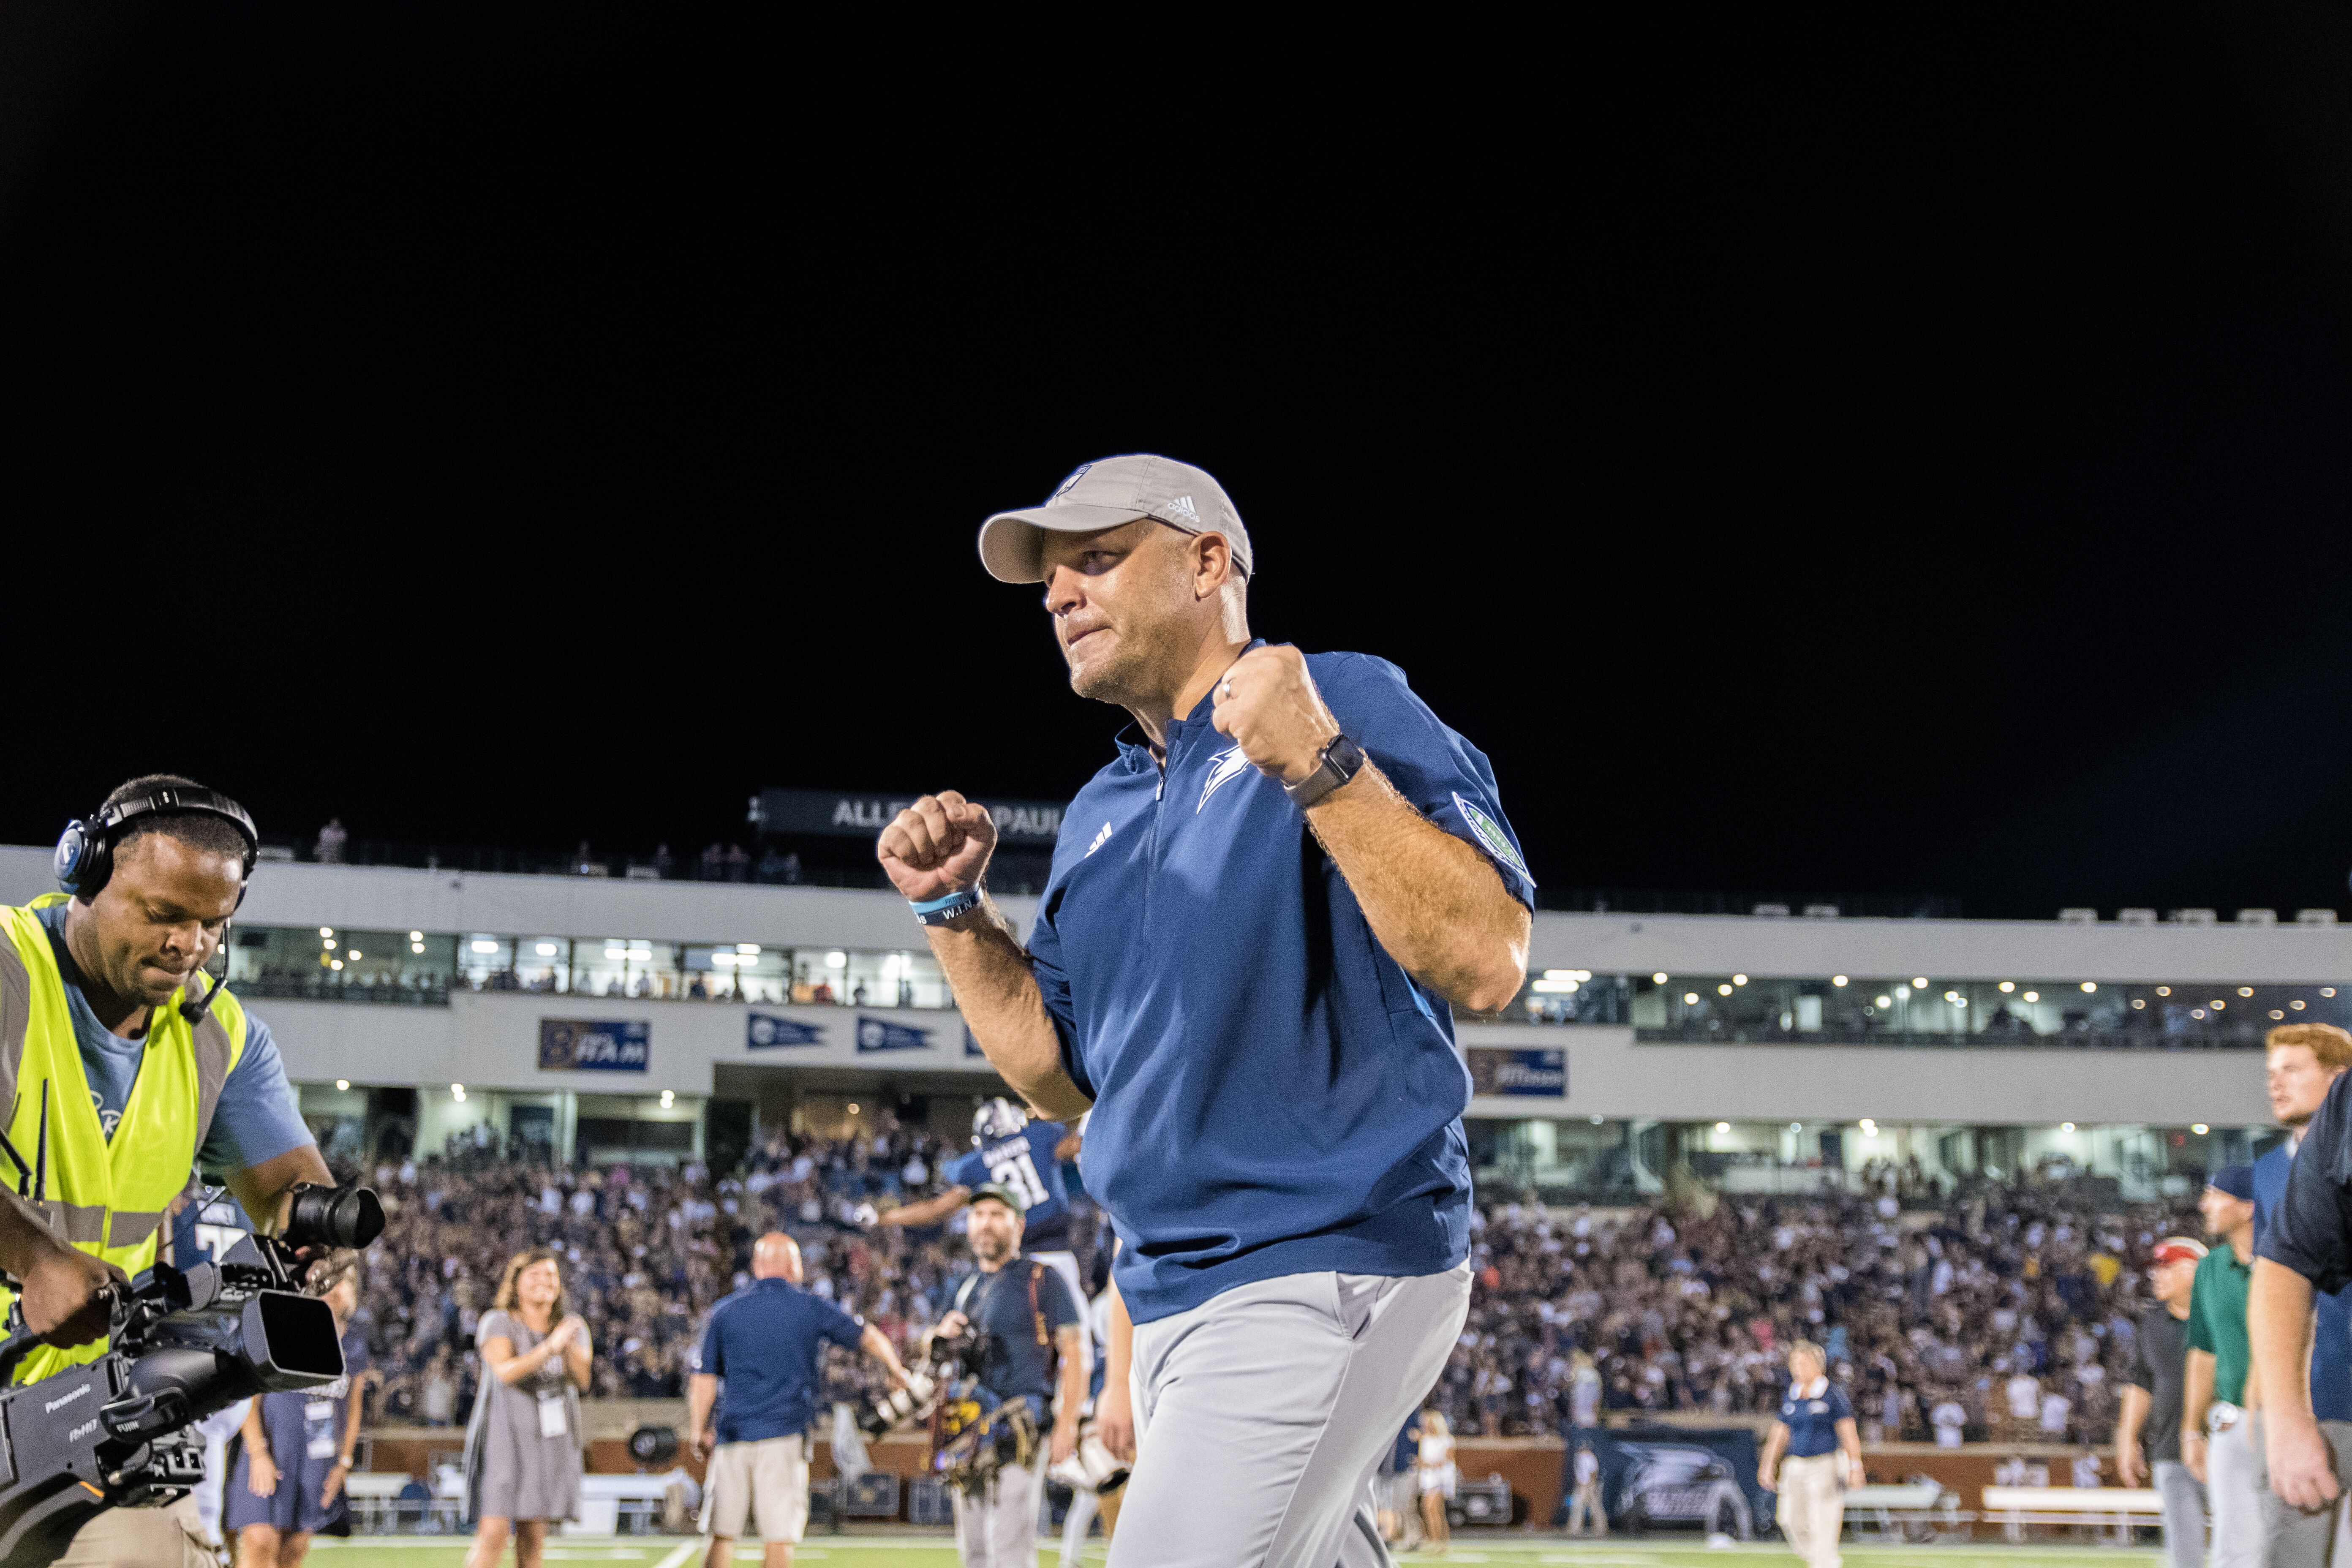 Football, Family and Faith: The Life of Chad Lunsford